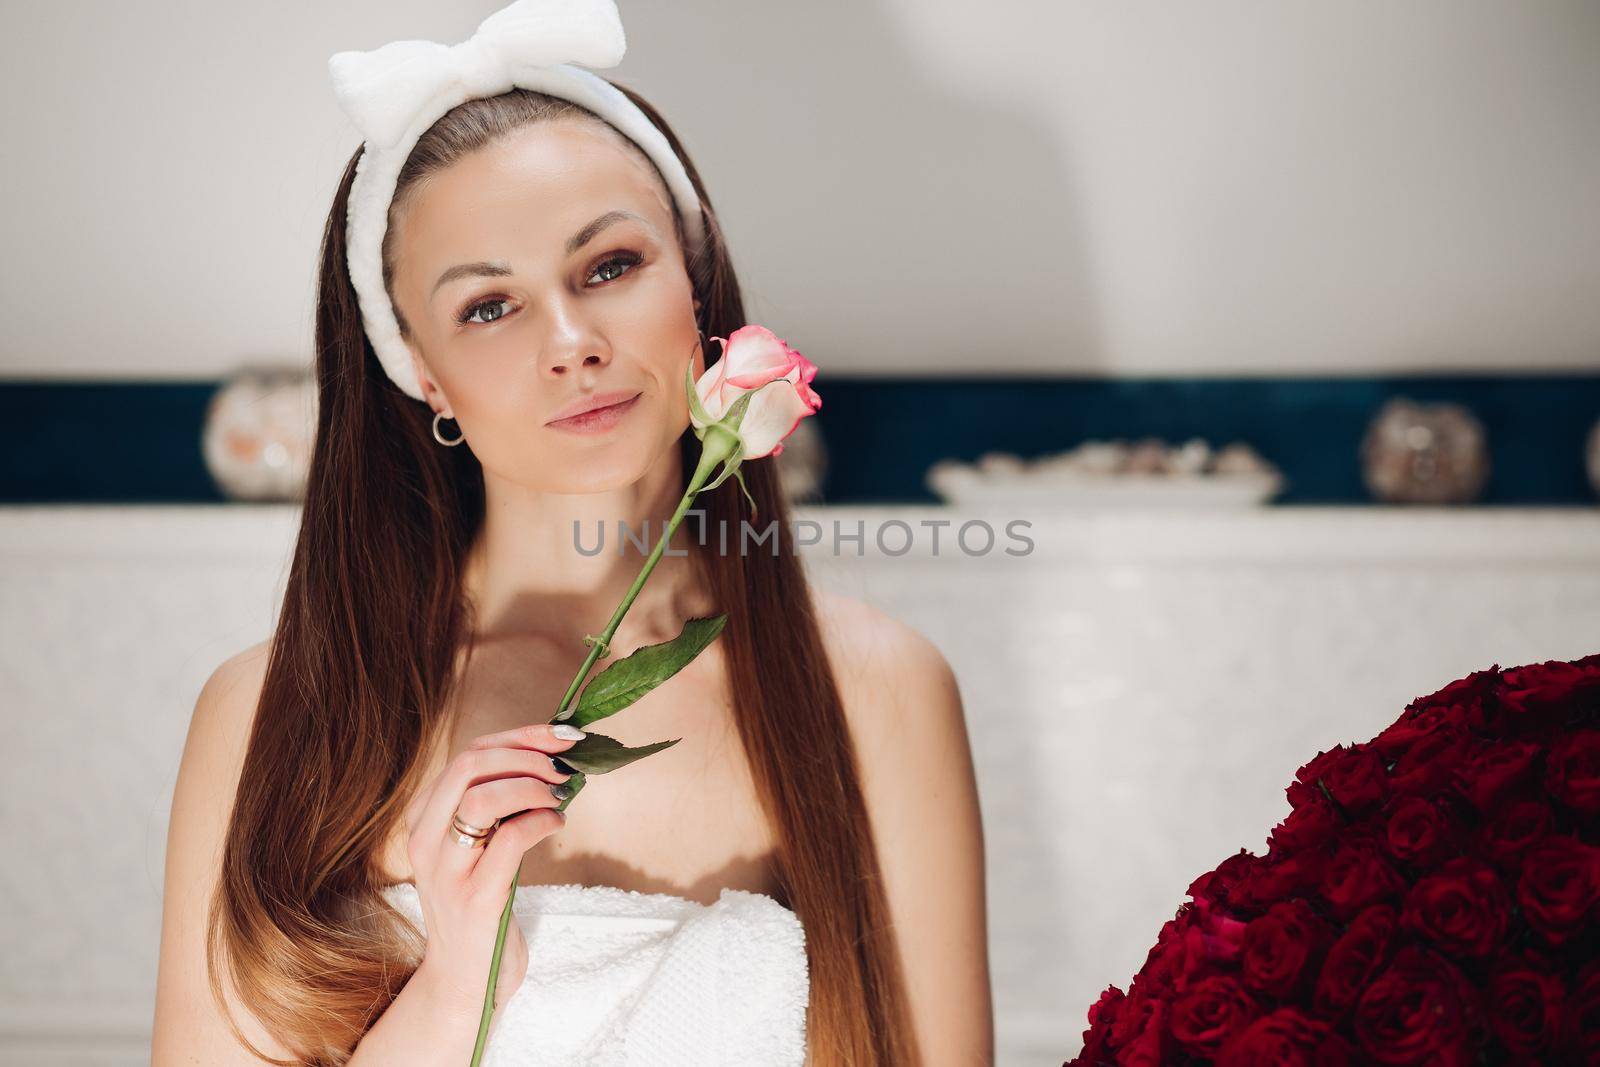 Portrait of sensual beautiful woman in white headband with bow for washing face smiling slightly at camera with fragile pink rose bud at her face.